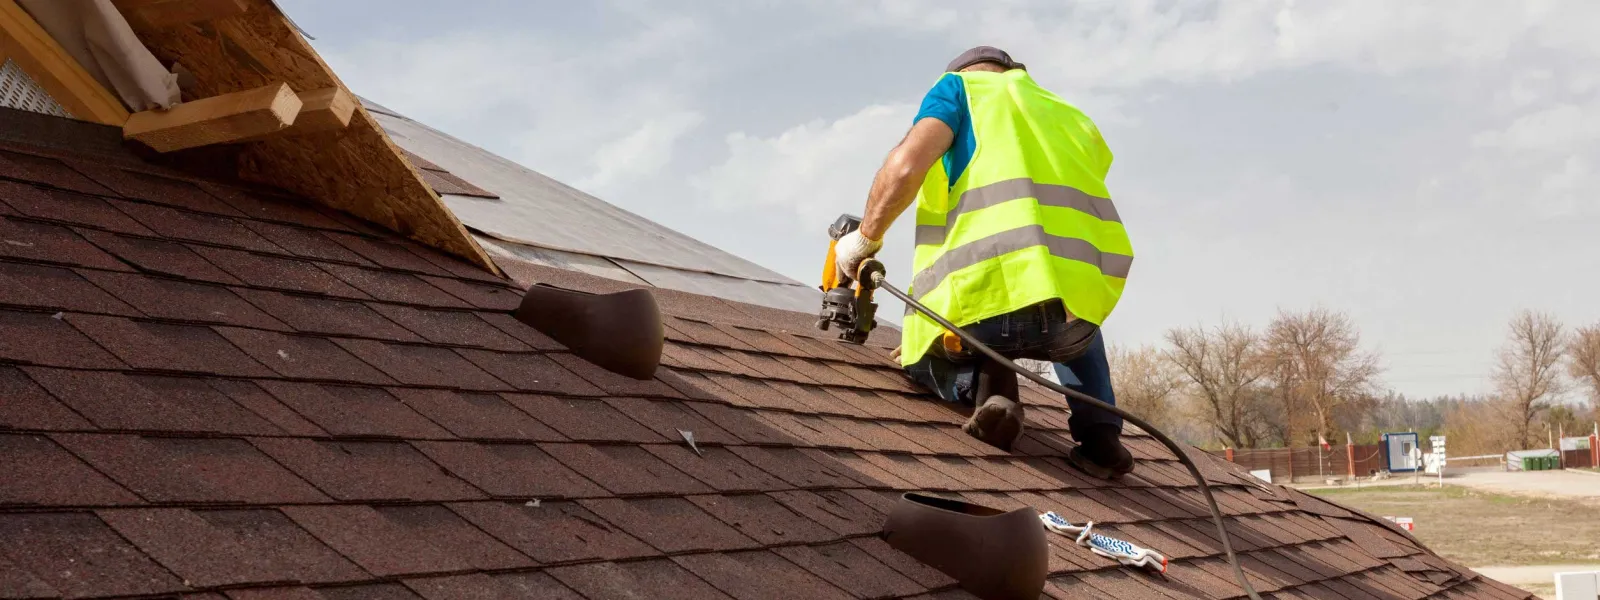 man Construction worker putting the asphalt roofing shingles on a roof